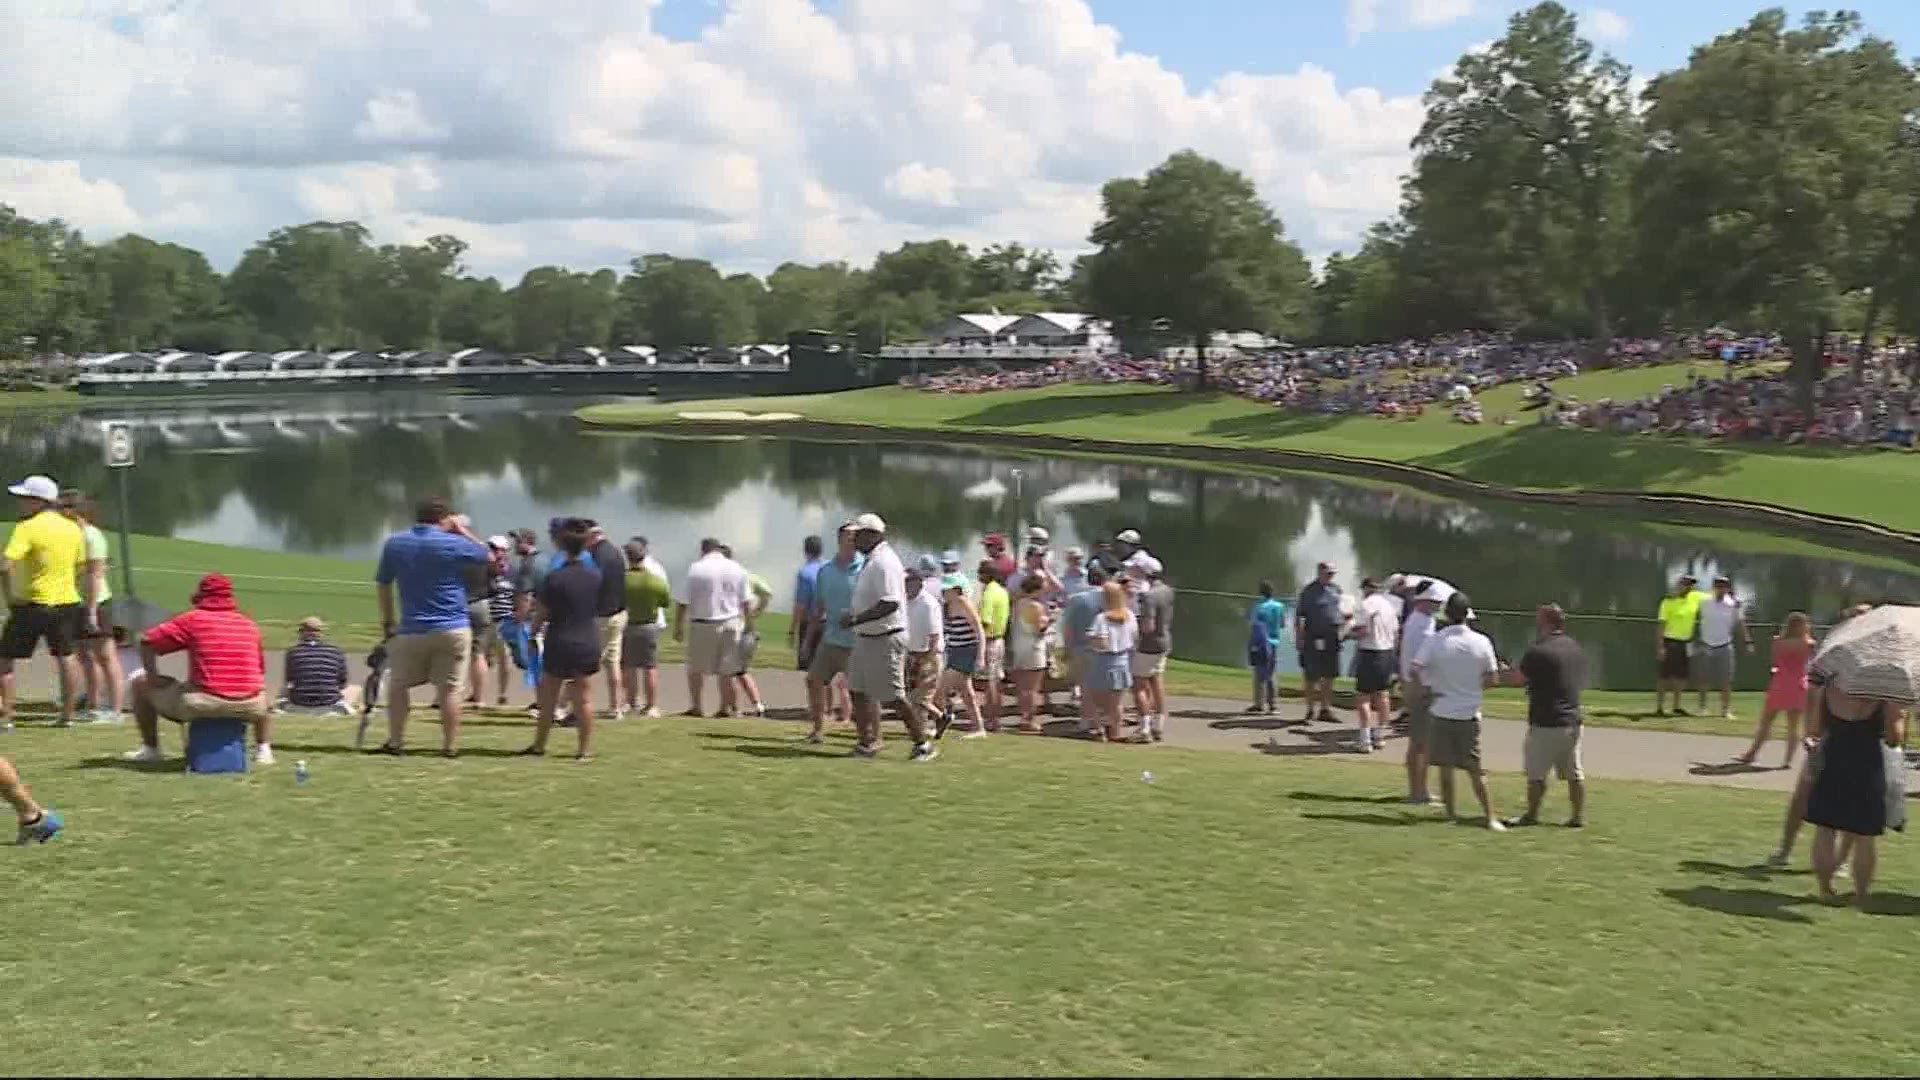 This will be the second PGA Championship played at Quail Hollow, but the first played in the month of May.